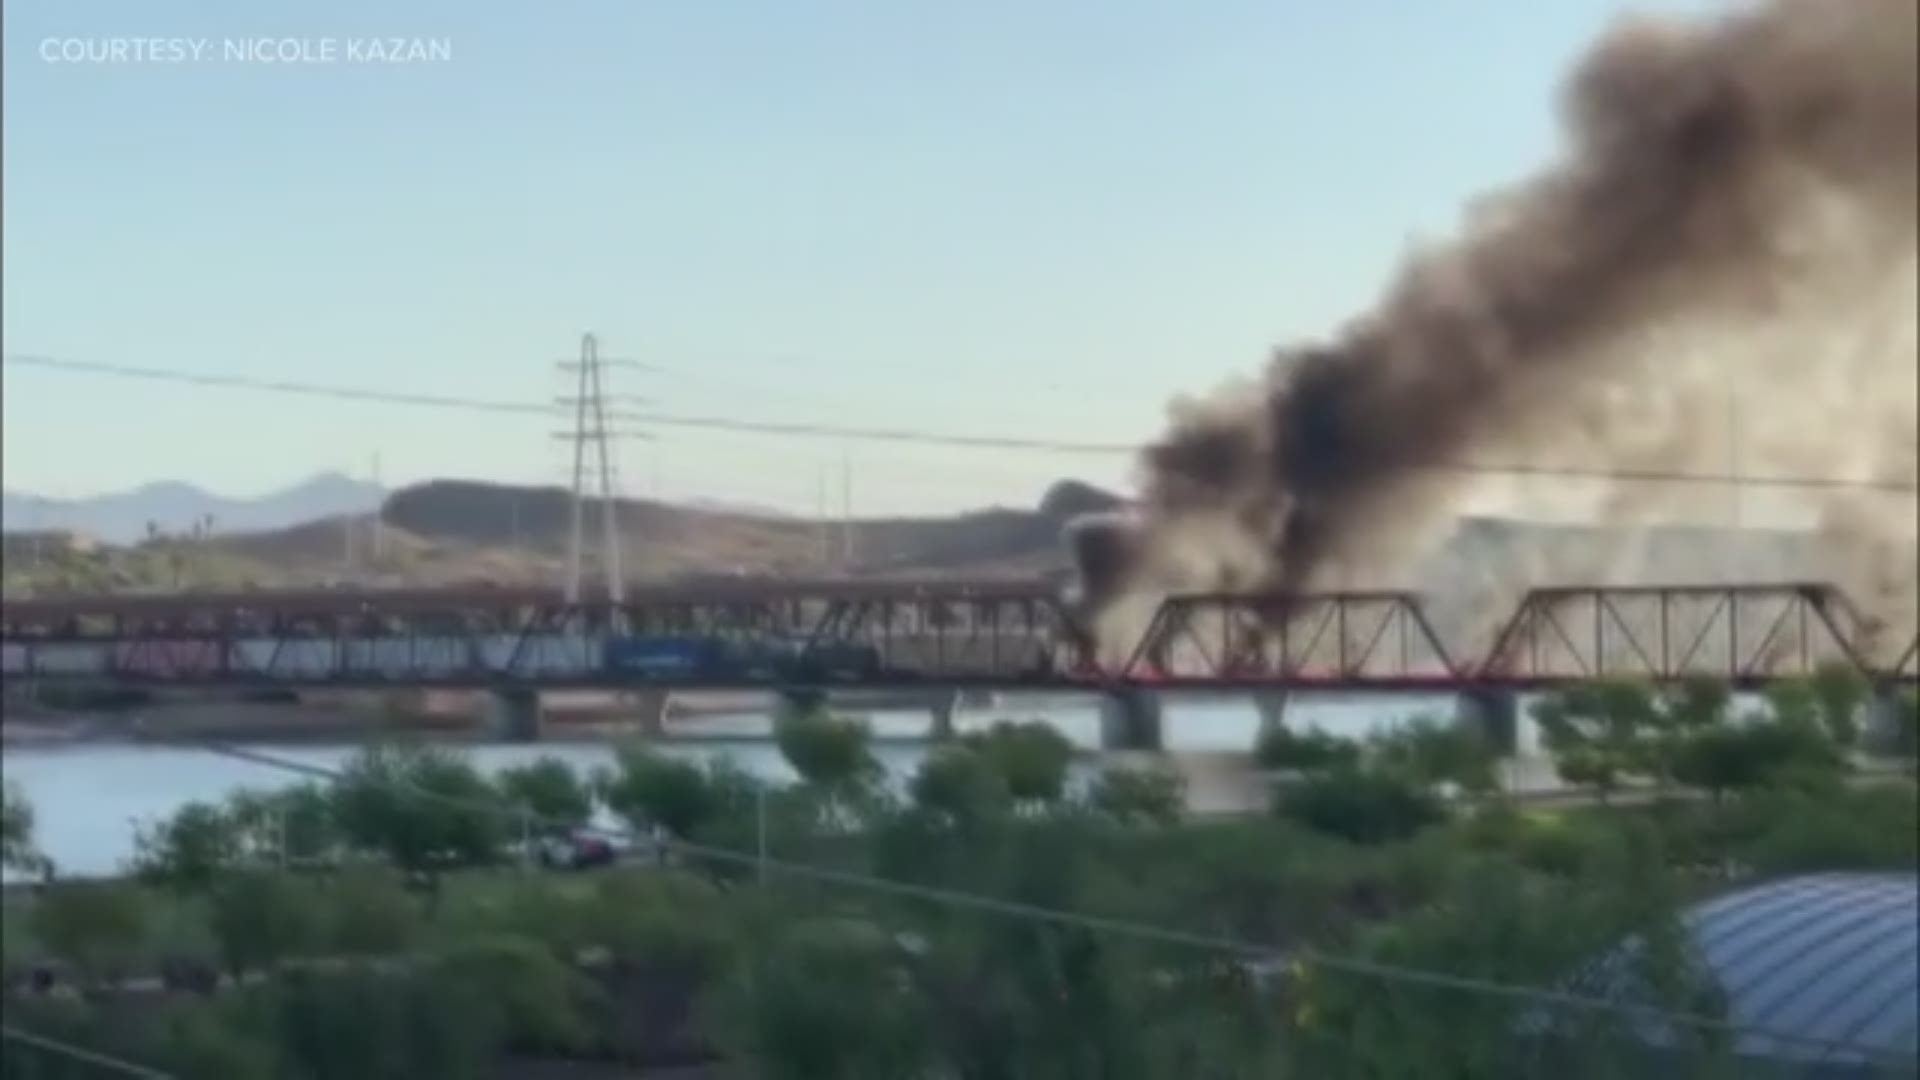 Video from Nicole Kazan shows smoke pouring from the train derailment on a Tempe Town Lake bridge. The train was on fire from the incident.